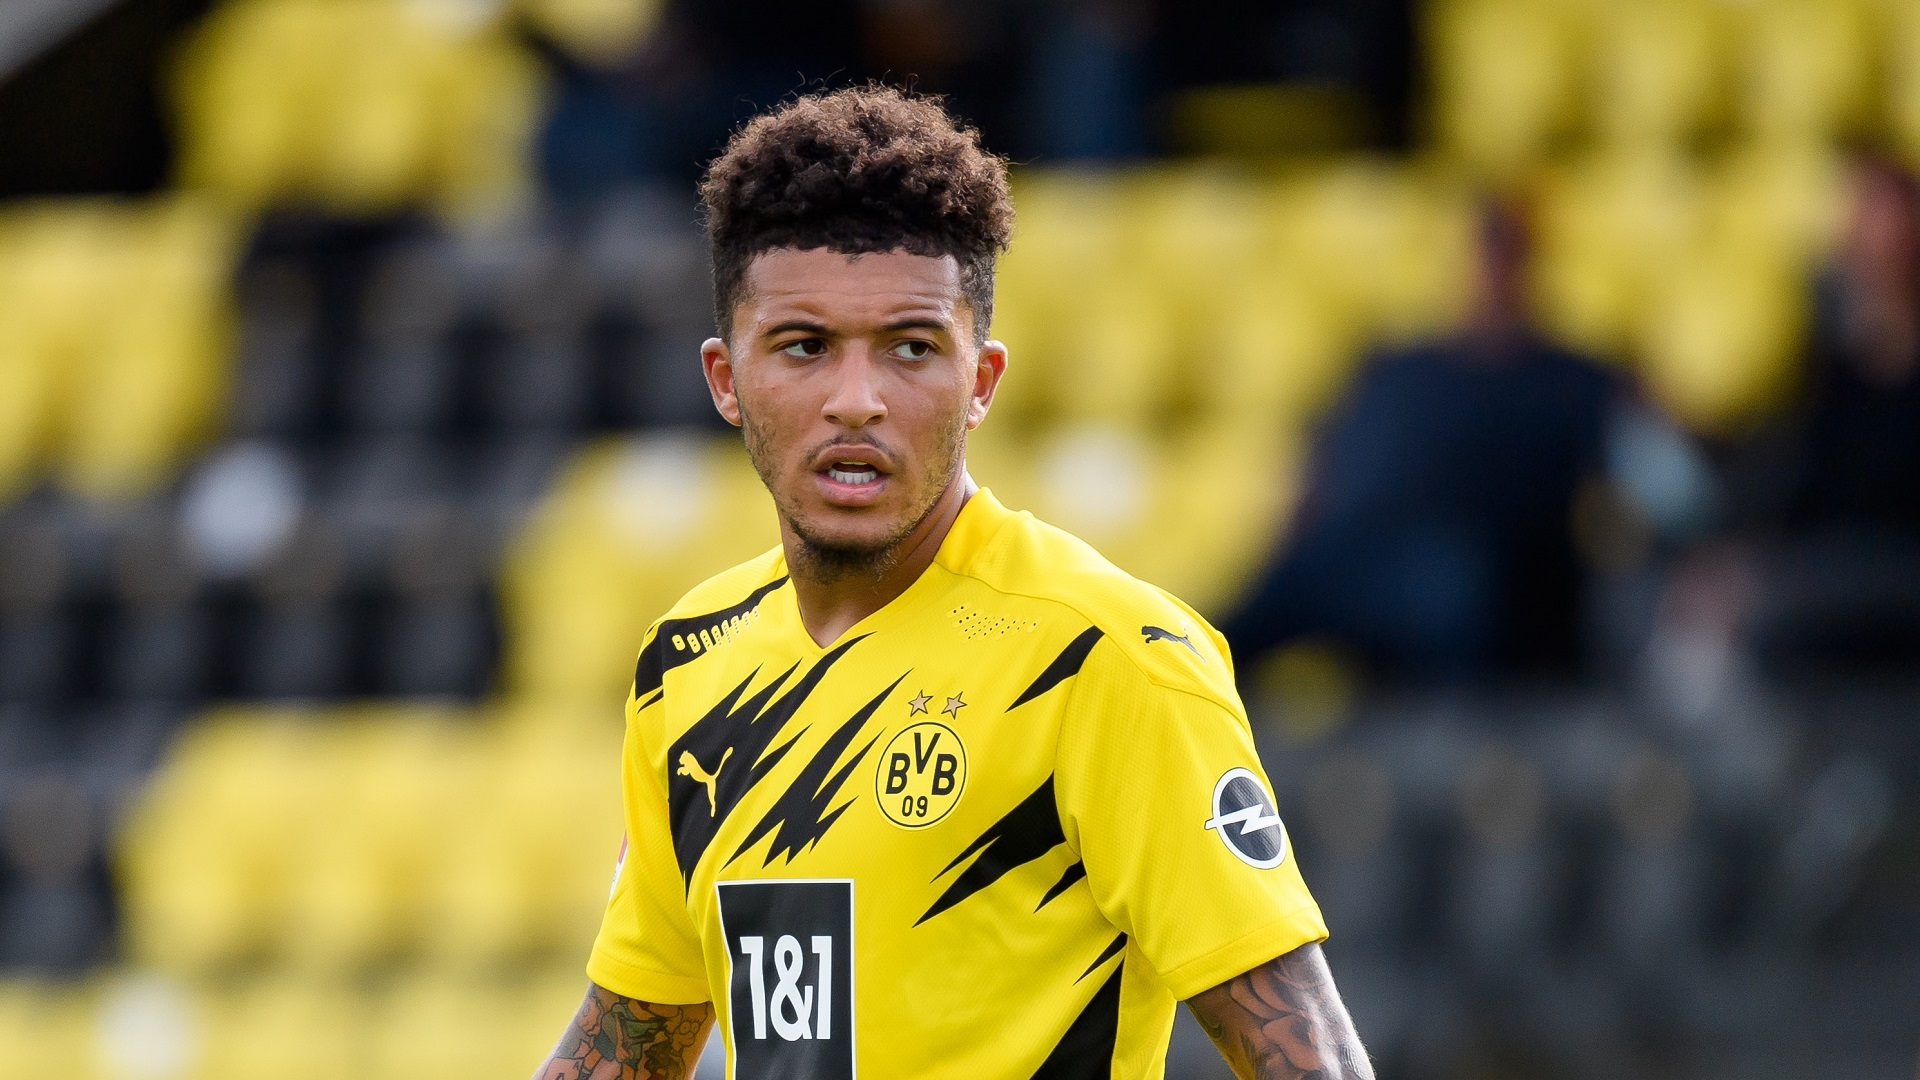 Who Is Jadon Sancho: Biography, Personal Life, Girlfriend, Football Career and Net Worth